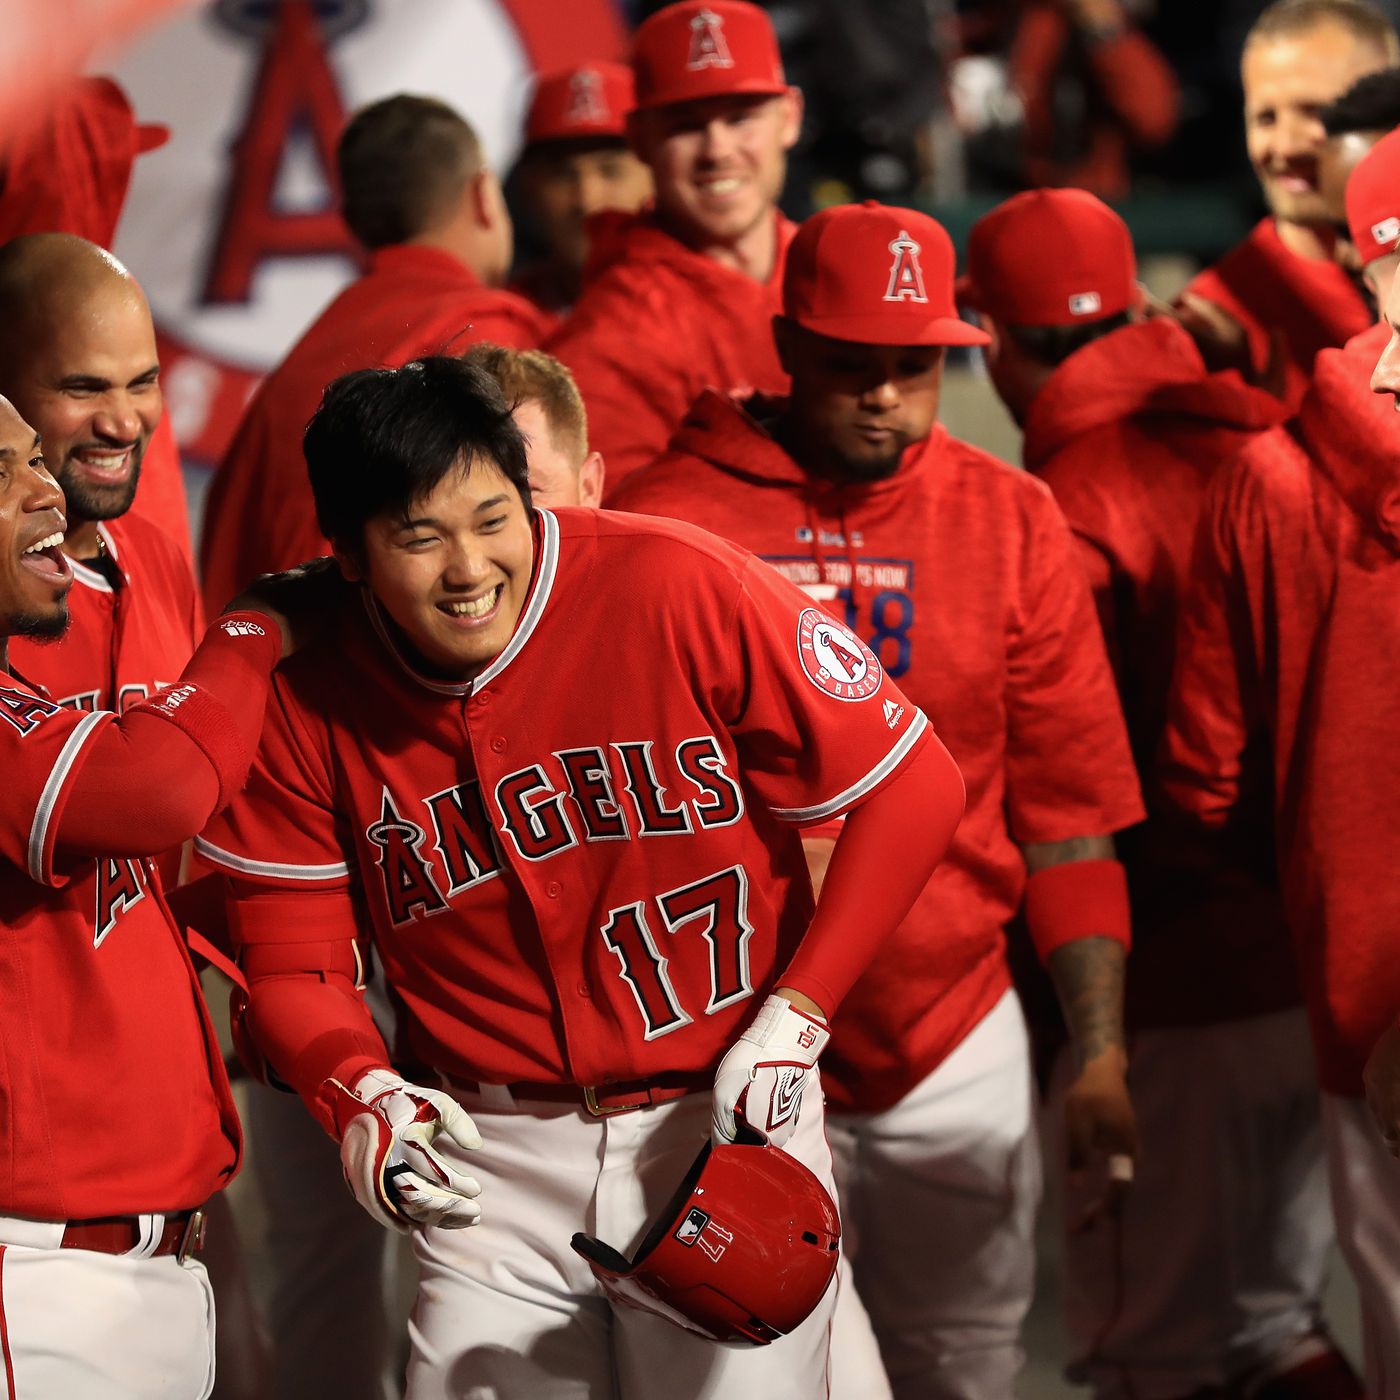 Here, look at some joyful picture of Shohei Ohtani after home runs